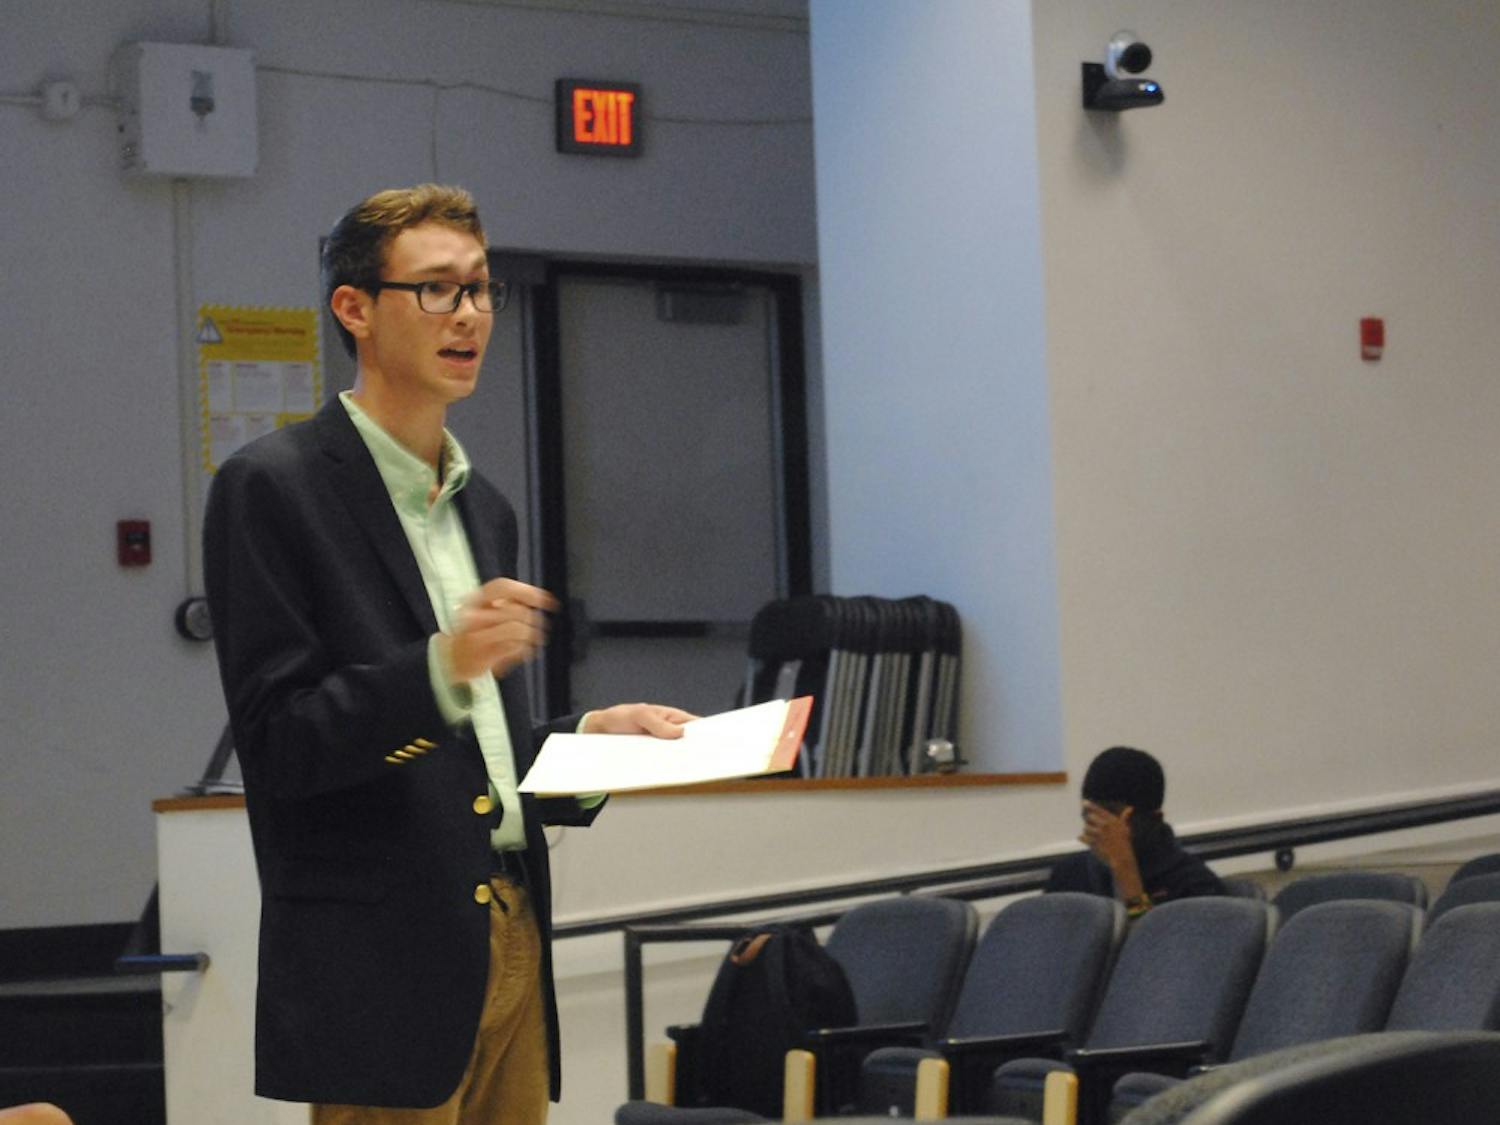 Graham Lowder, member of the Young Democrats, participates in a debate against the College Republicans on Wednesday. The teams discussed issues including climate change, immigration, and higher education. 